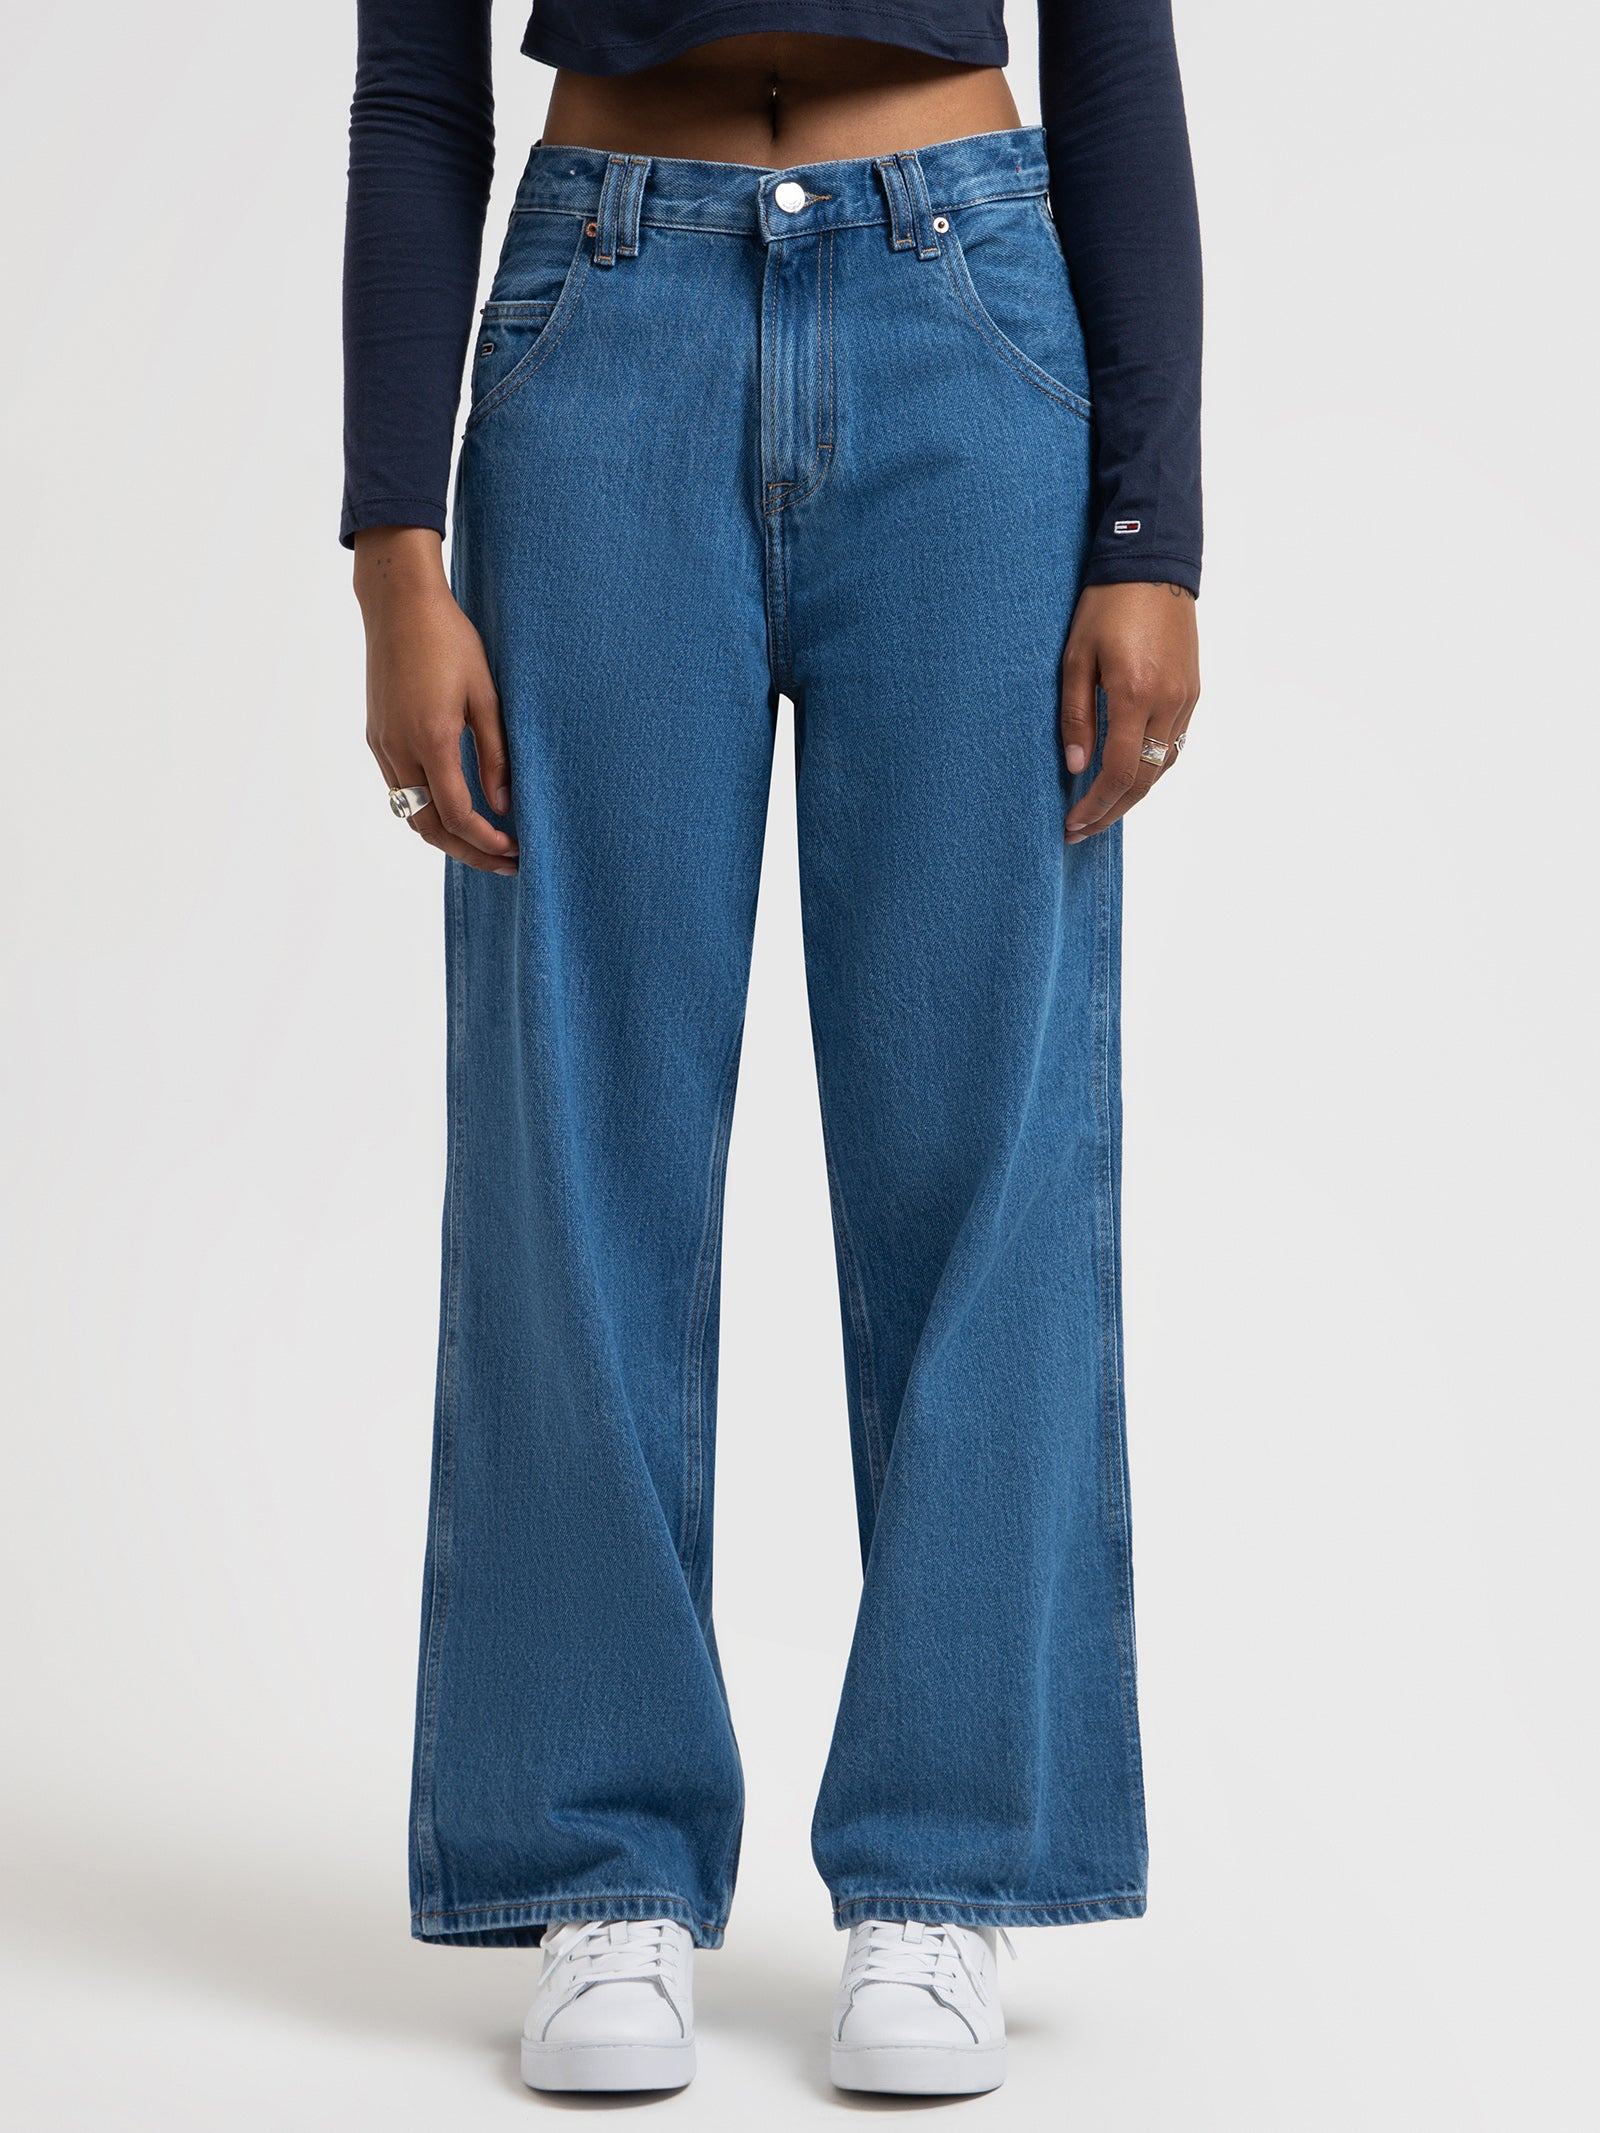 Daisy Low Rise Baggy Jeans in Denim - Glue Store